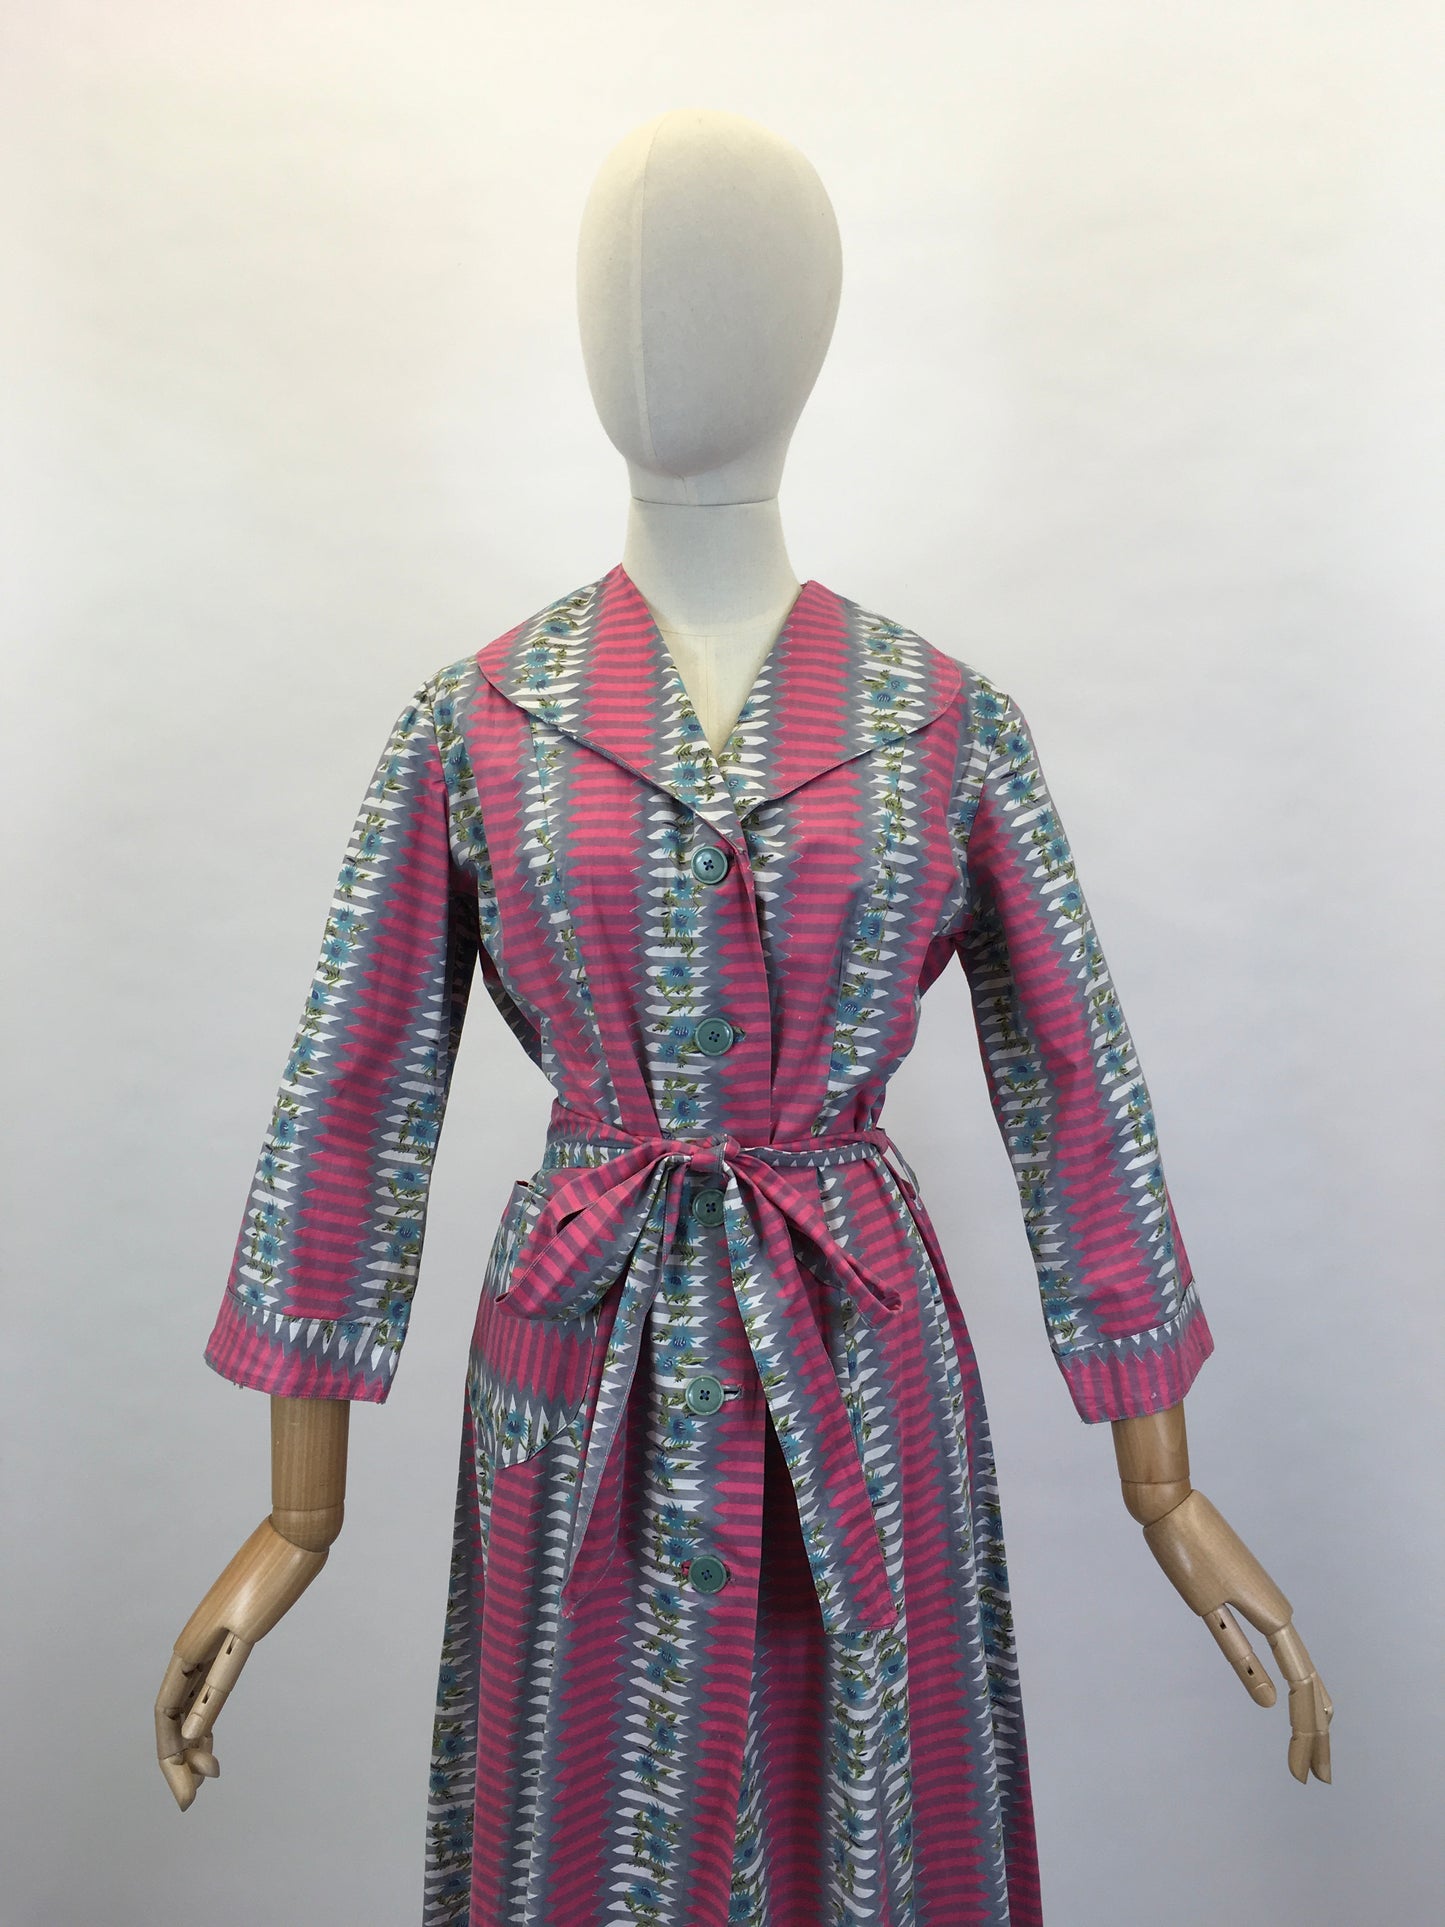 Original 1950’s Pretty Cotton Day Dress - In Bright Pinks, Blues & Greys